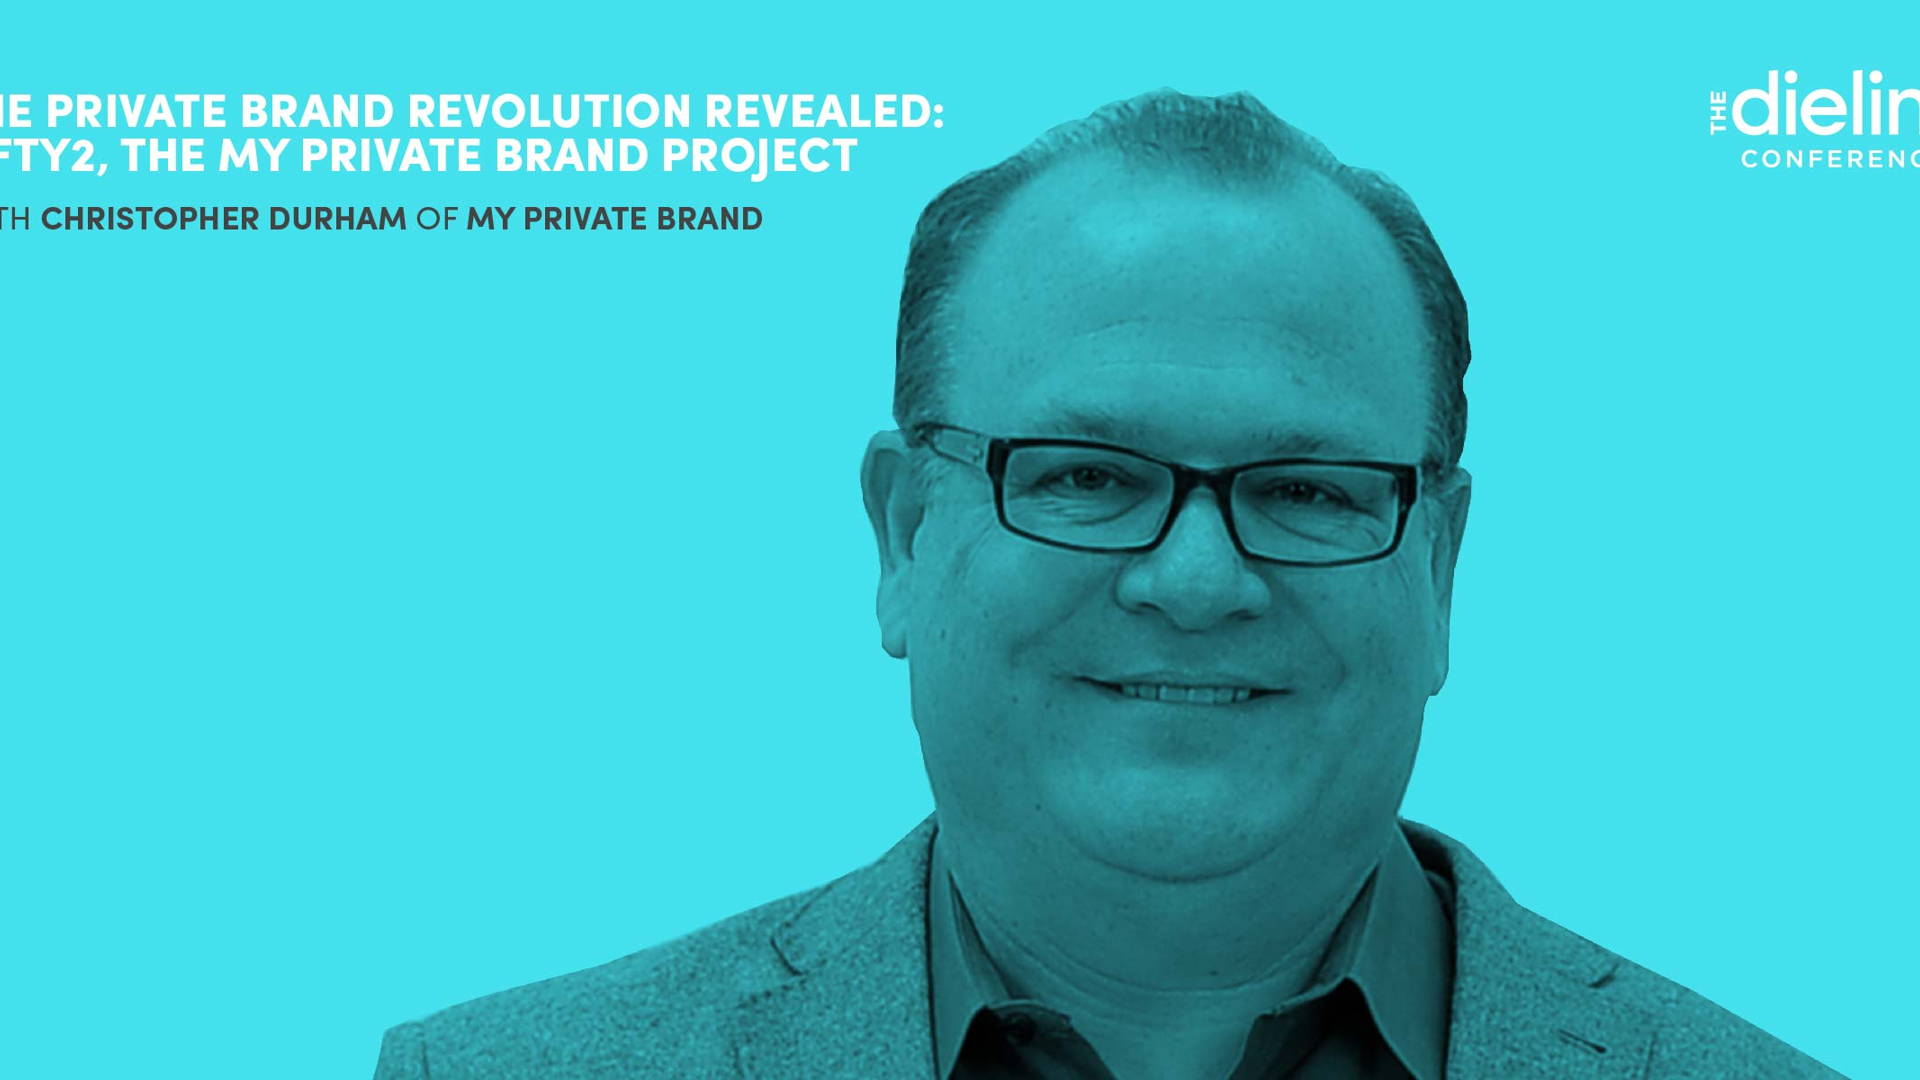 Featured image for The Private Brand Revolution Revealed: Fifty2, The My Private Brand Project